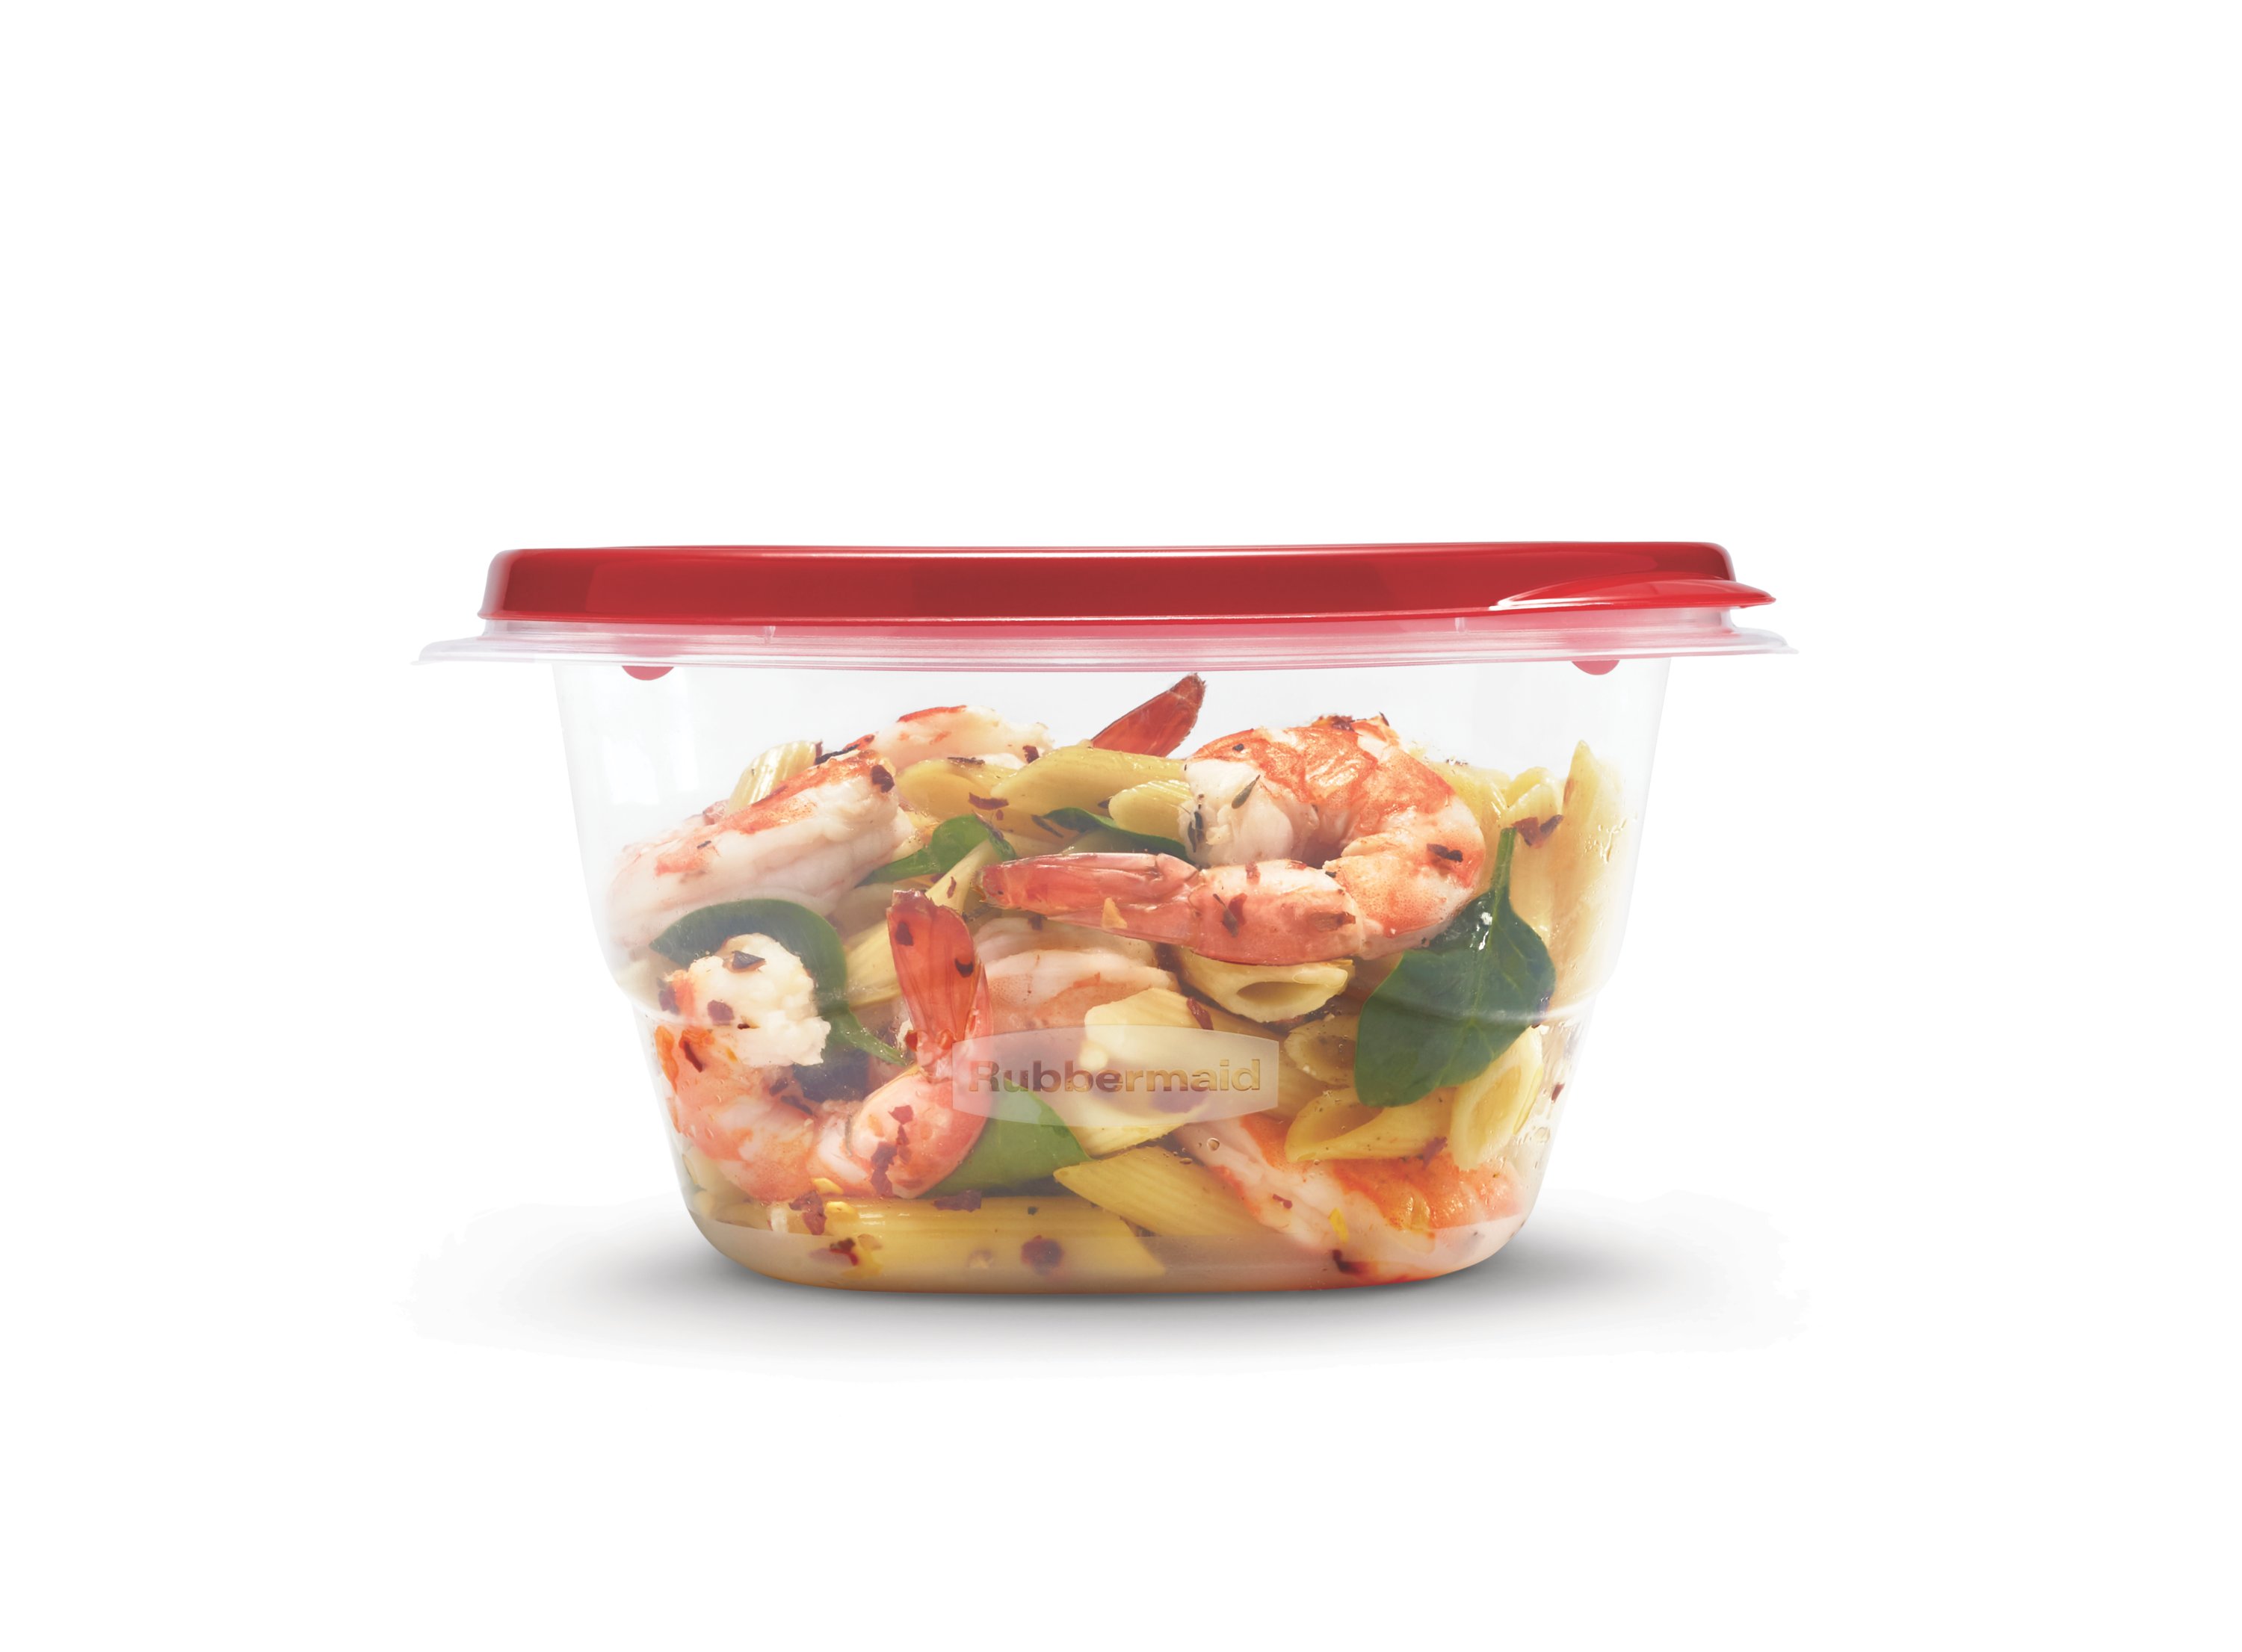 Rubbermaid Take Alongs Meal Prep Containers, 30 pc - Kroger